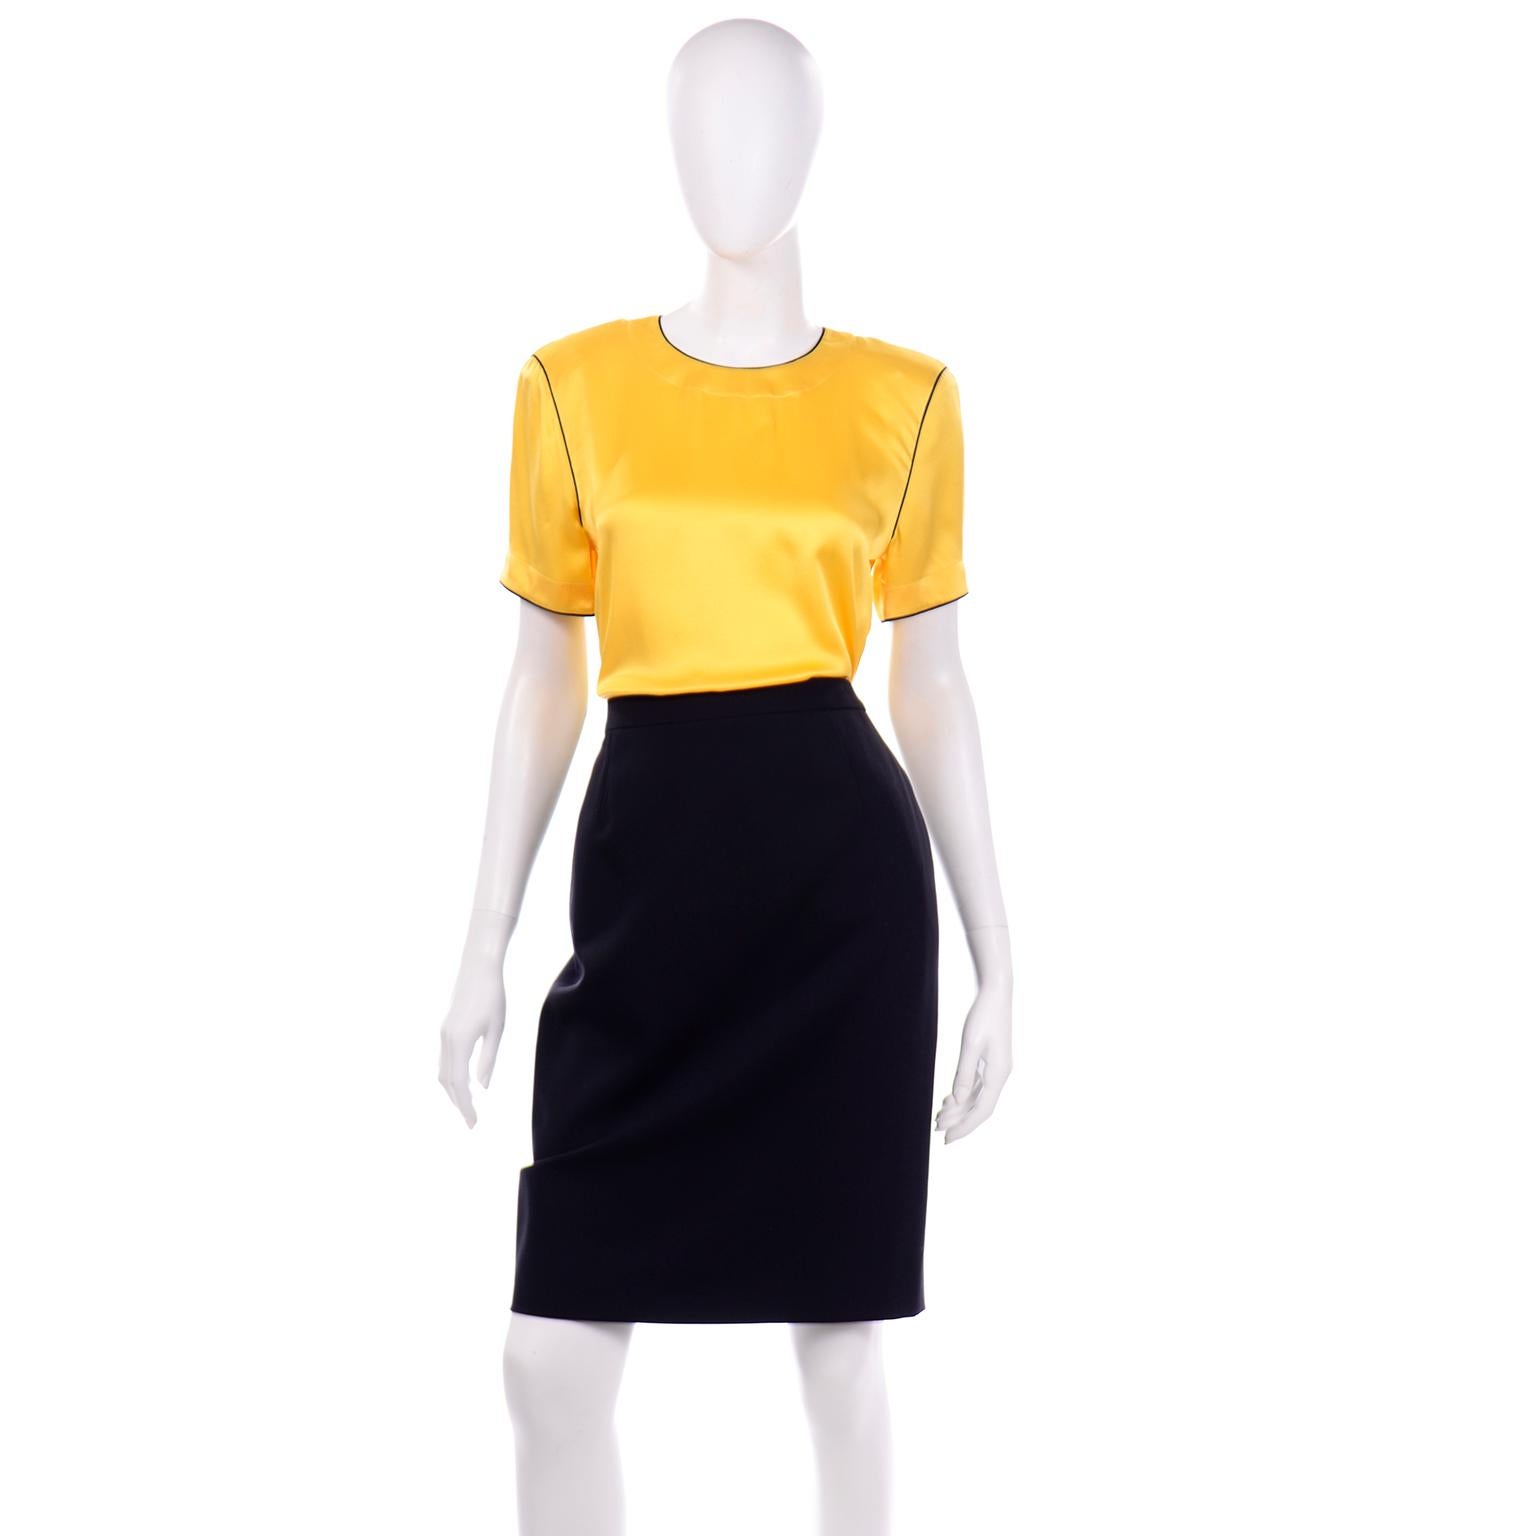 We love vintage Margaretha Ley for Escada pieces and this beautiful 3 piece bright yellow and black skirt suit is a good example of the quality and unique style elements found in her pieces! We also really love suits because they offer so many